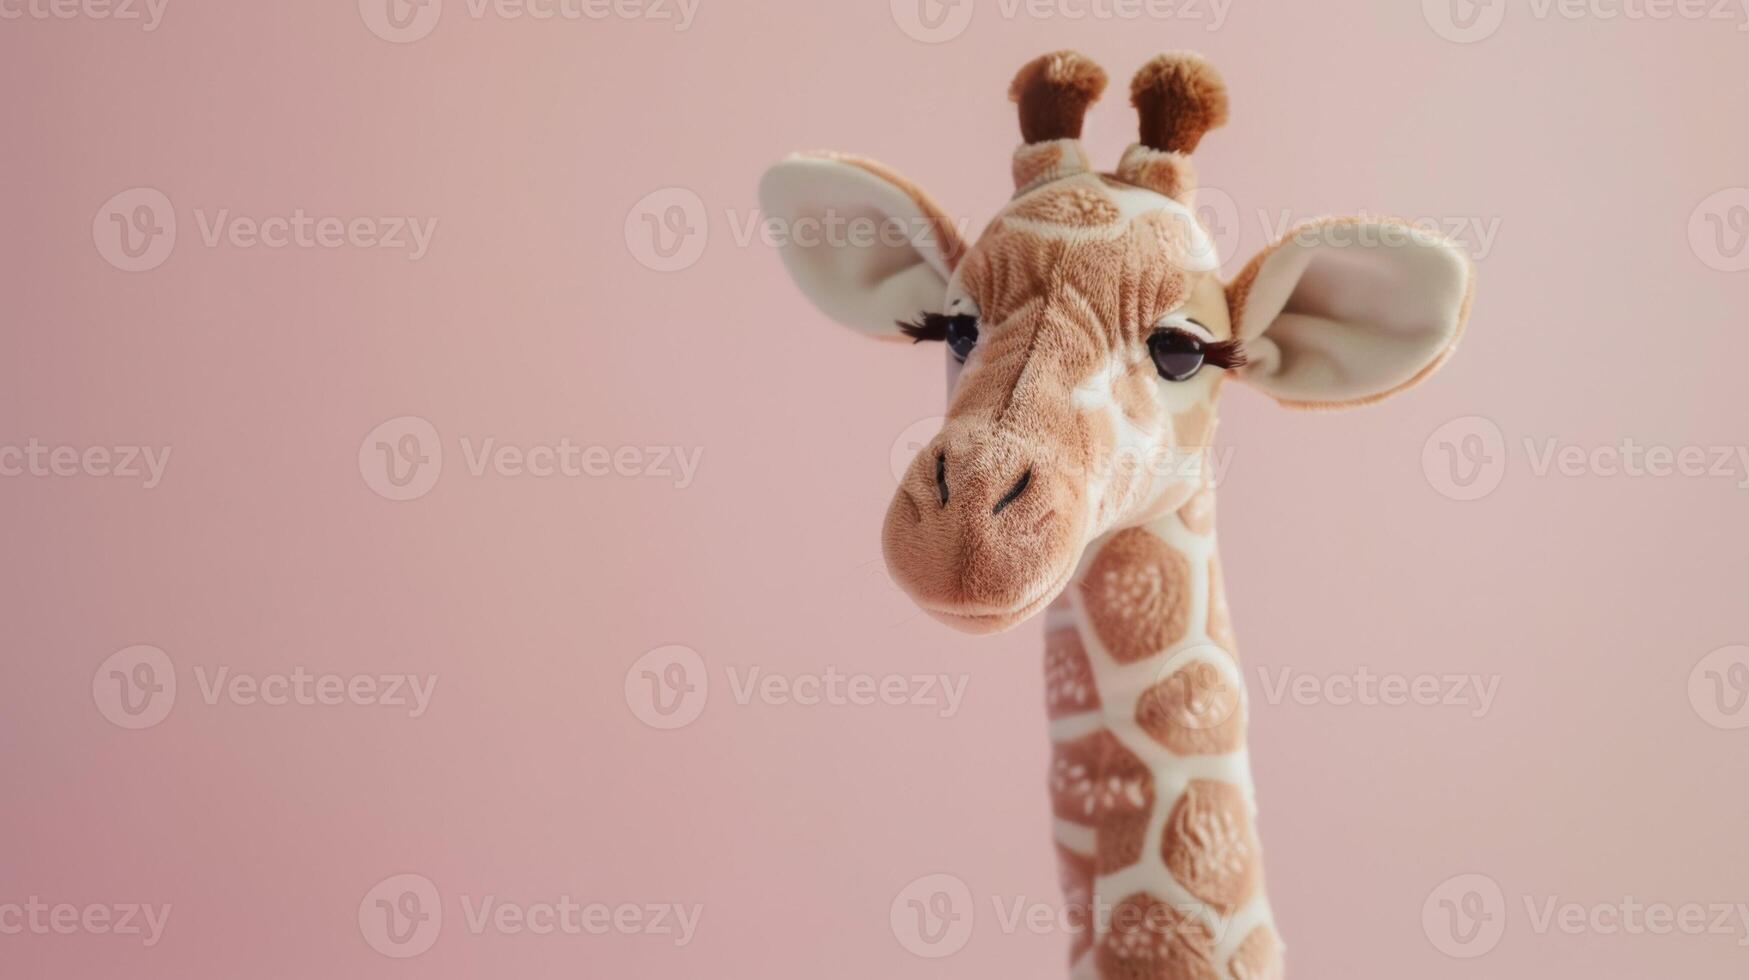 Stuffed giraffe toy with fluffy spots on a pink background adds playful charm photo